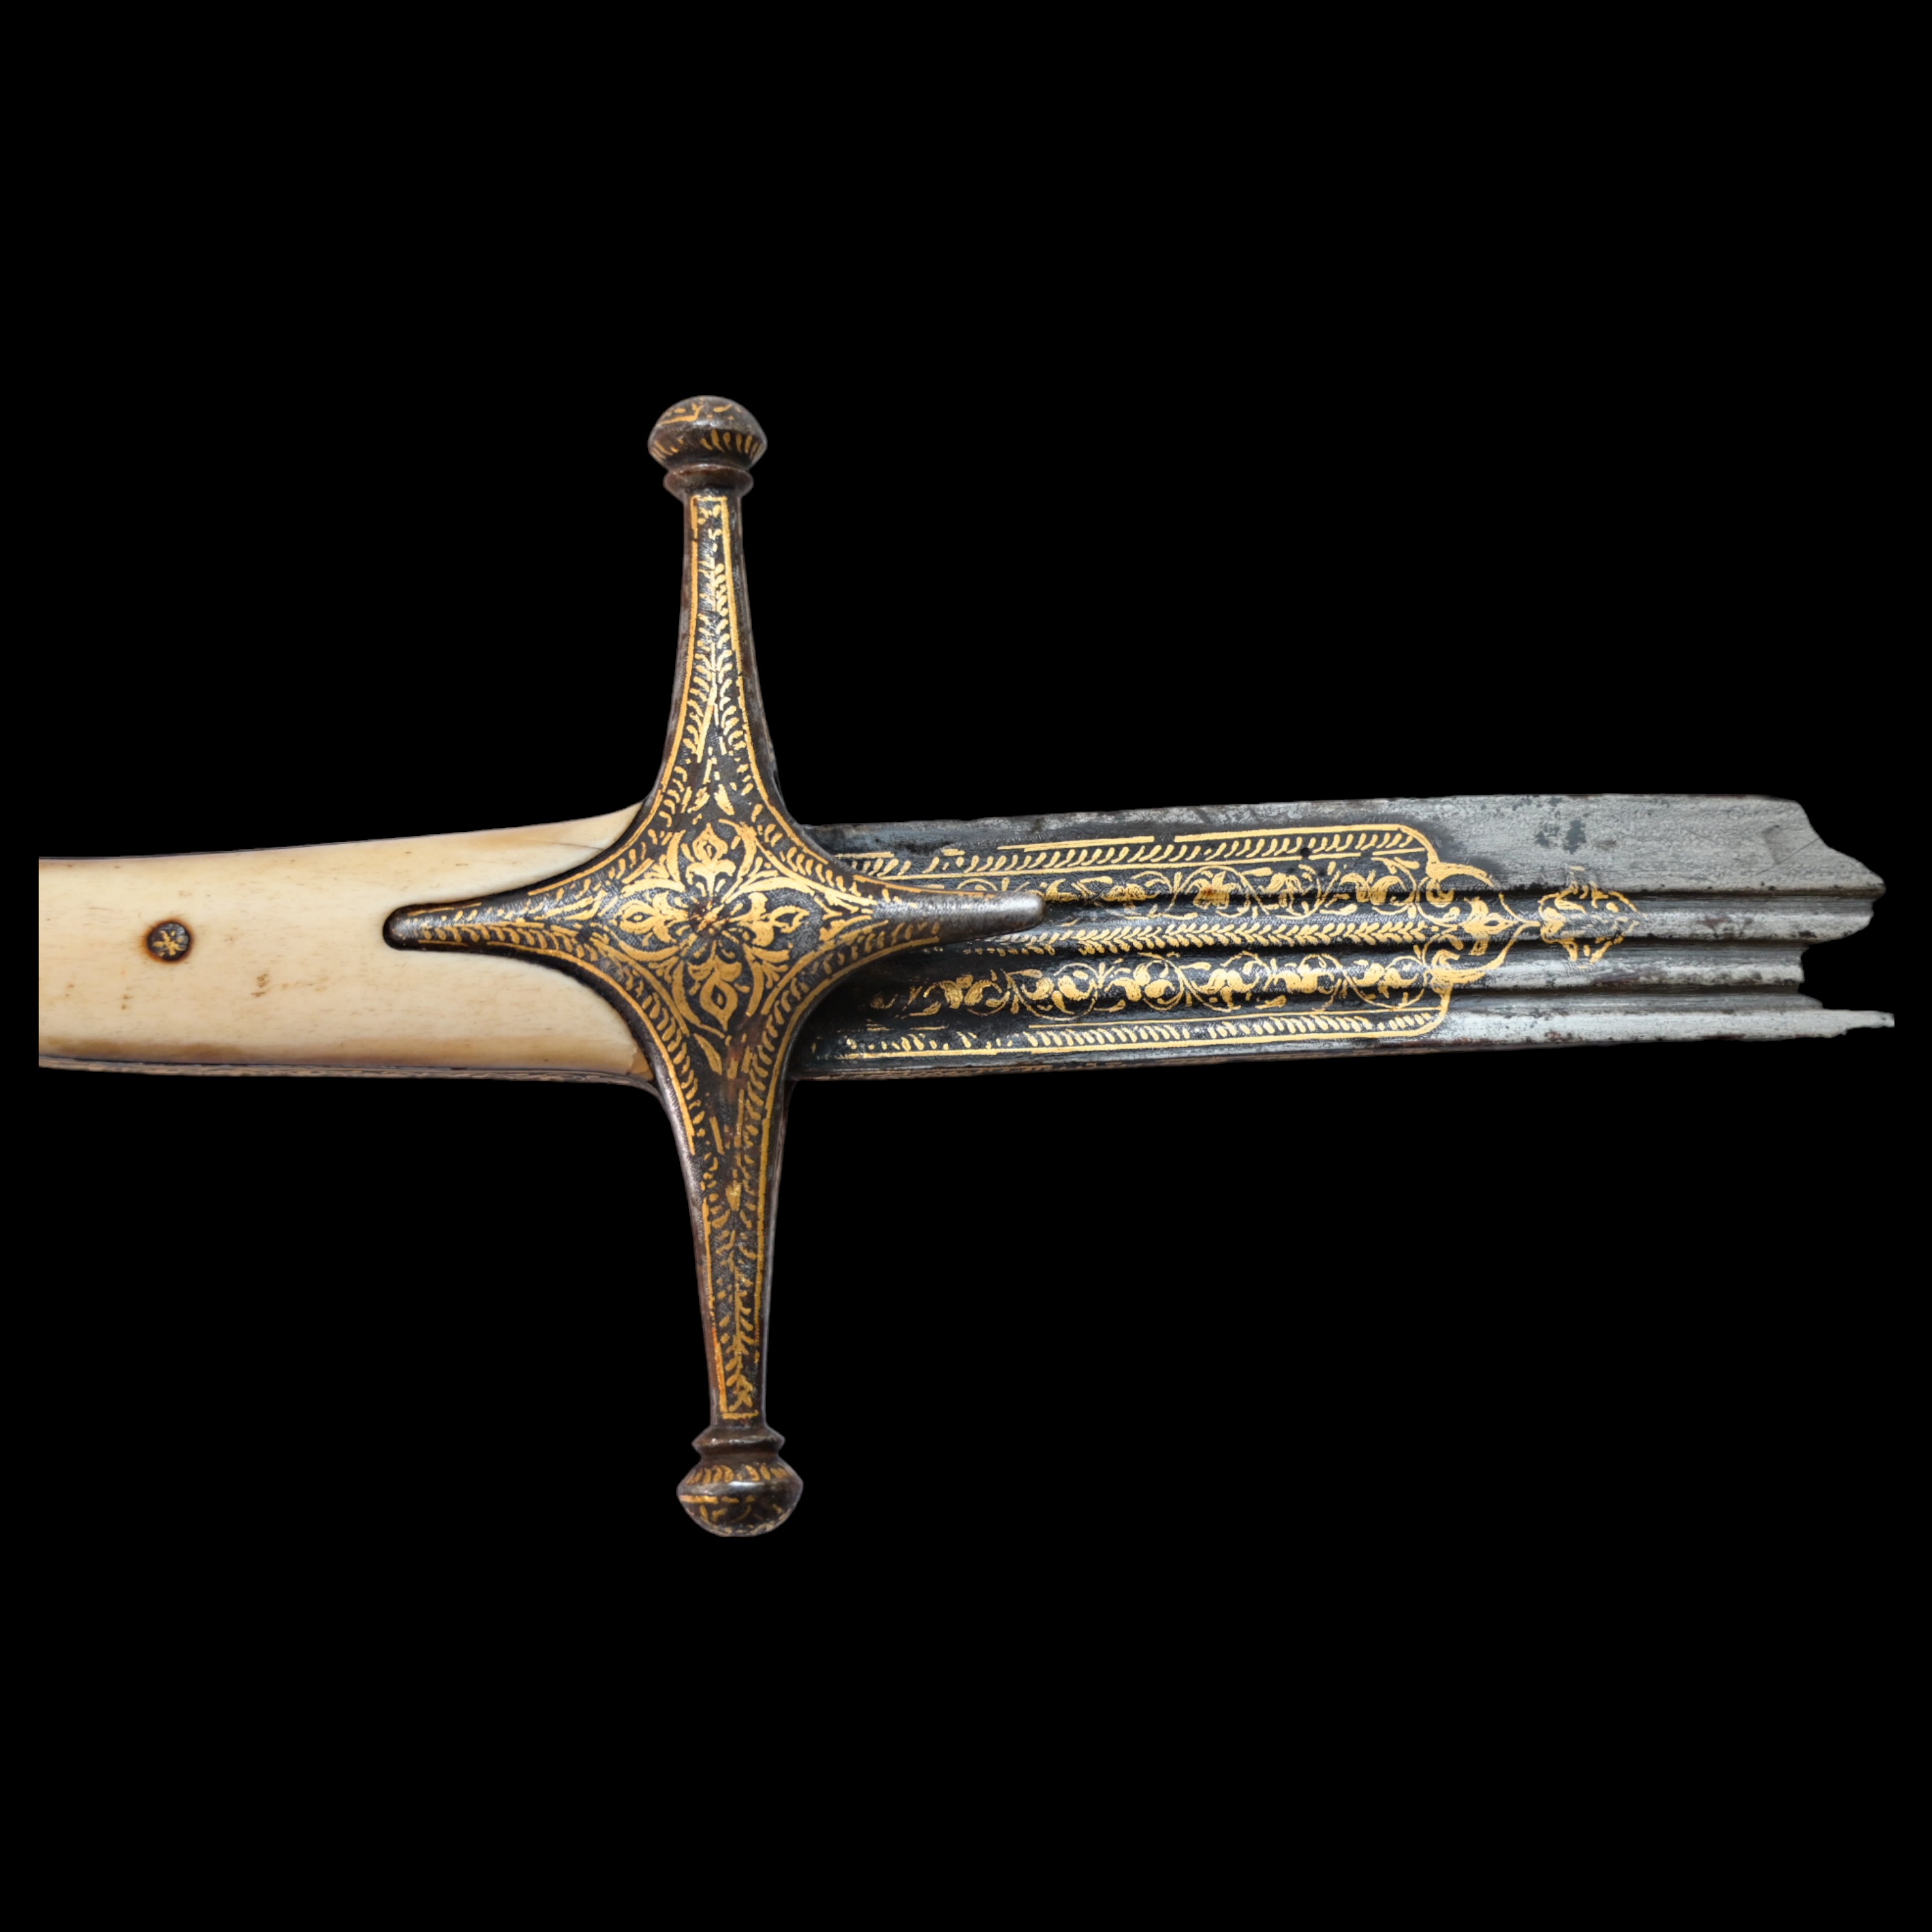 Richly decorated with gold Georgian saber from the 19th century with an 18th century blade. - Image 6 of 9